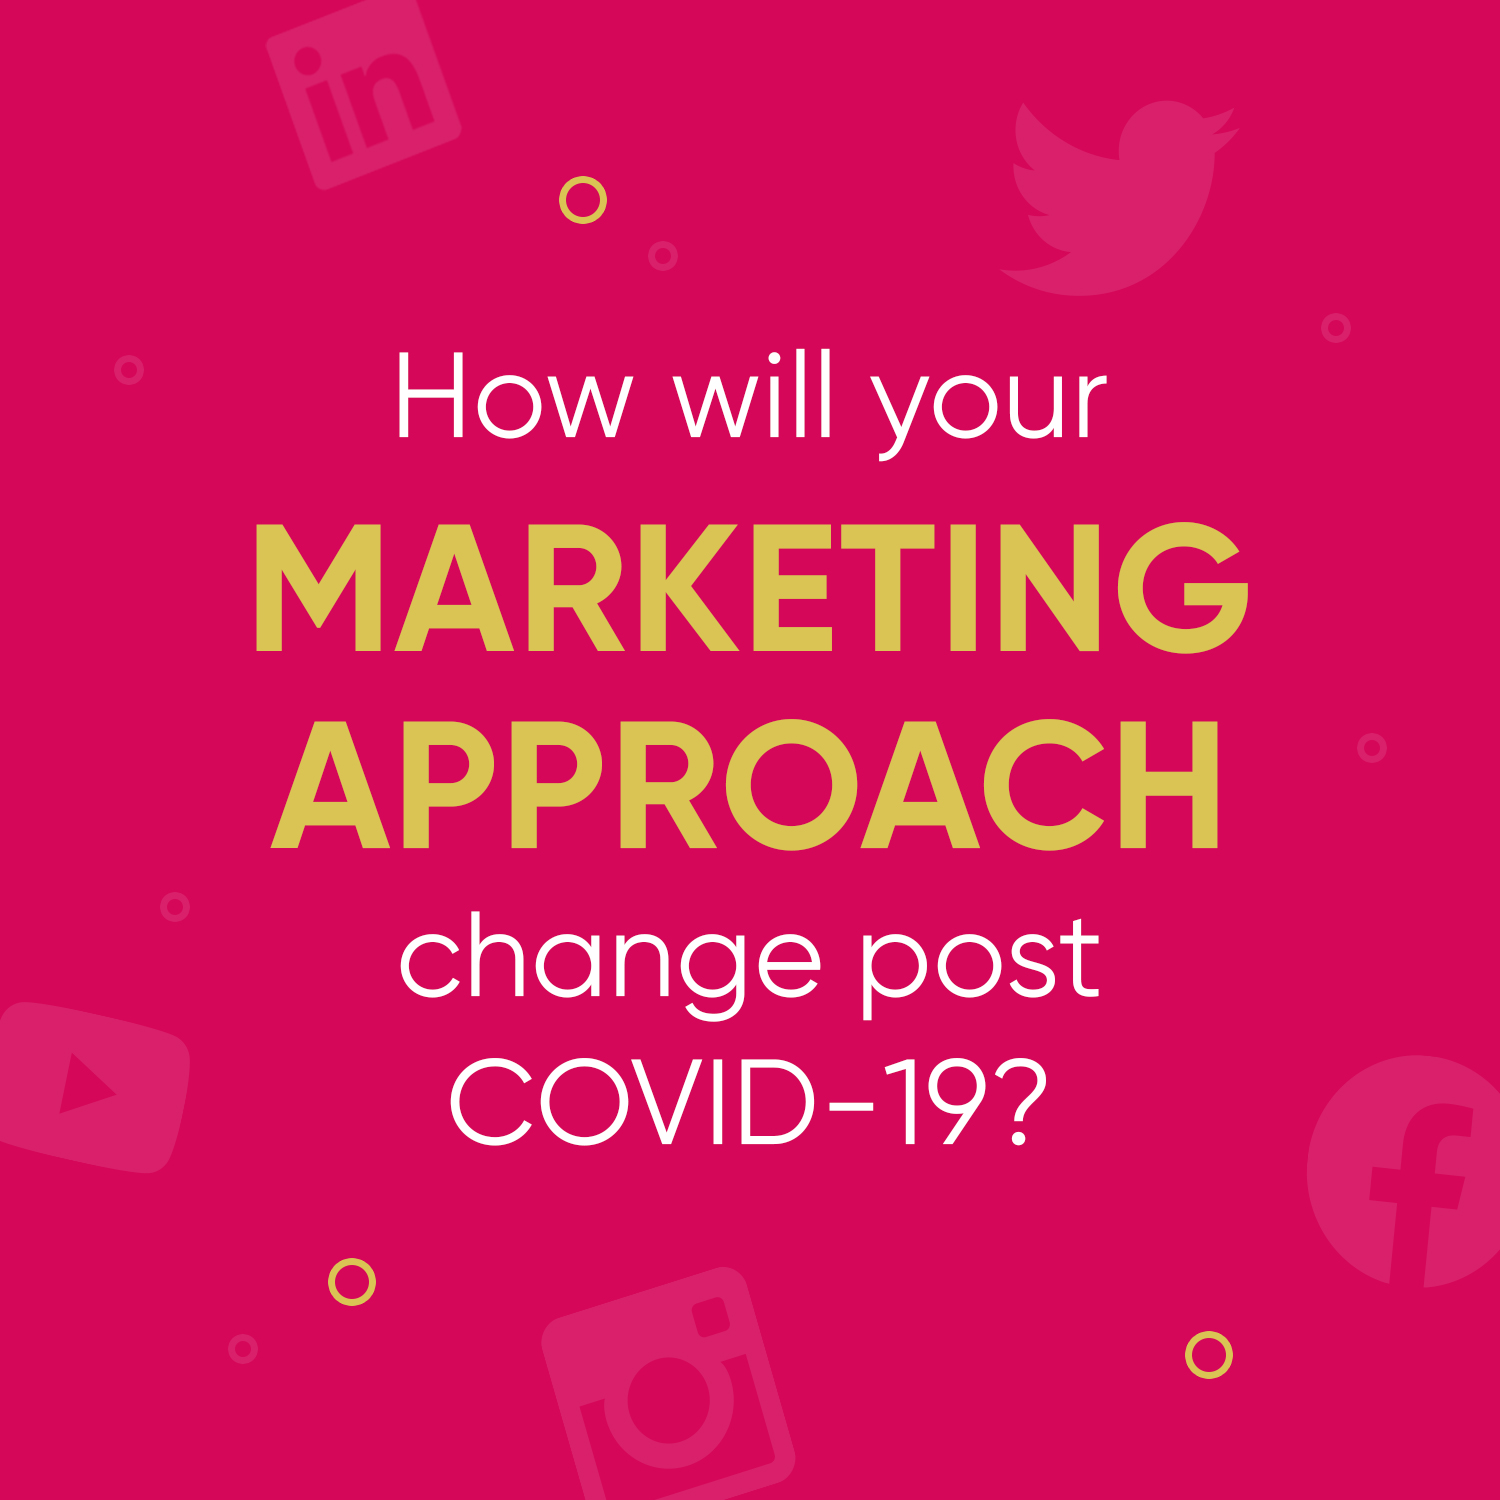 Will you approach marketing differently post Covid-19?